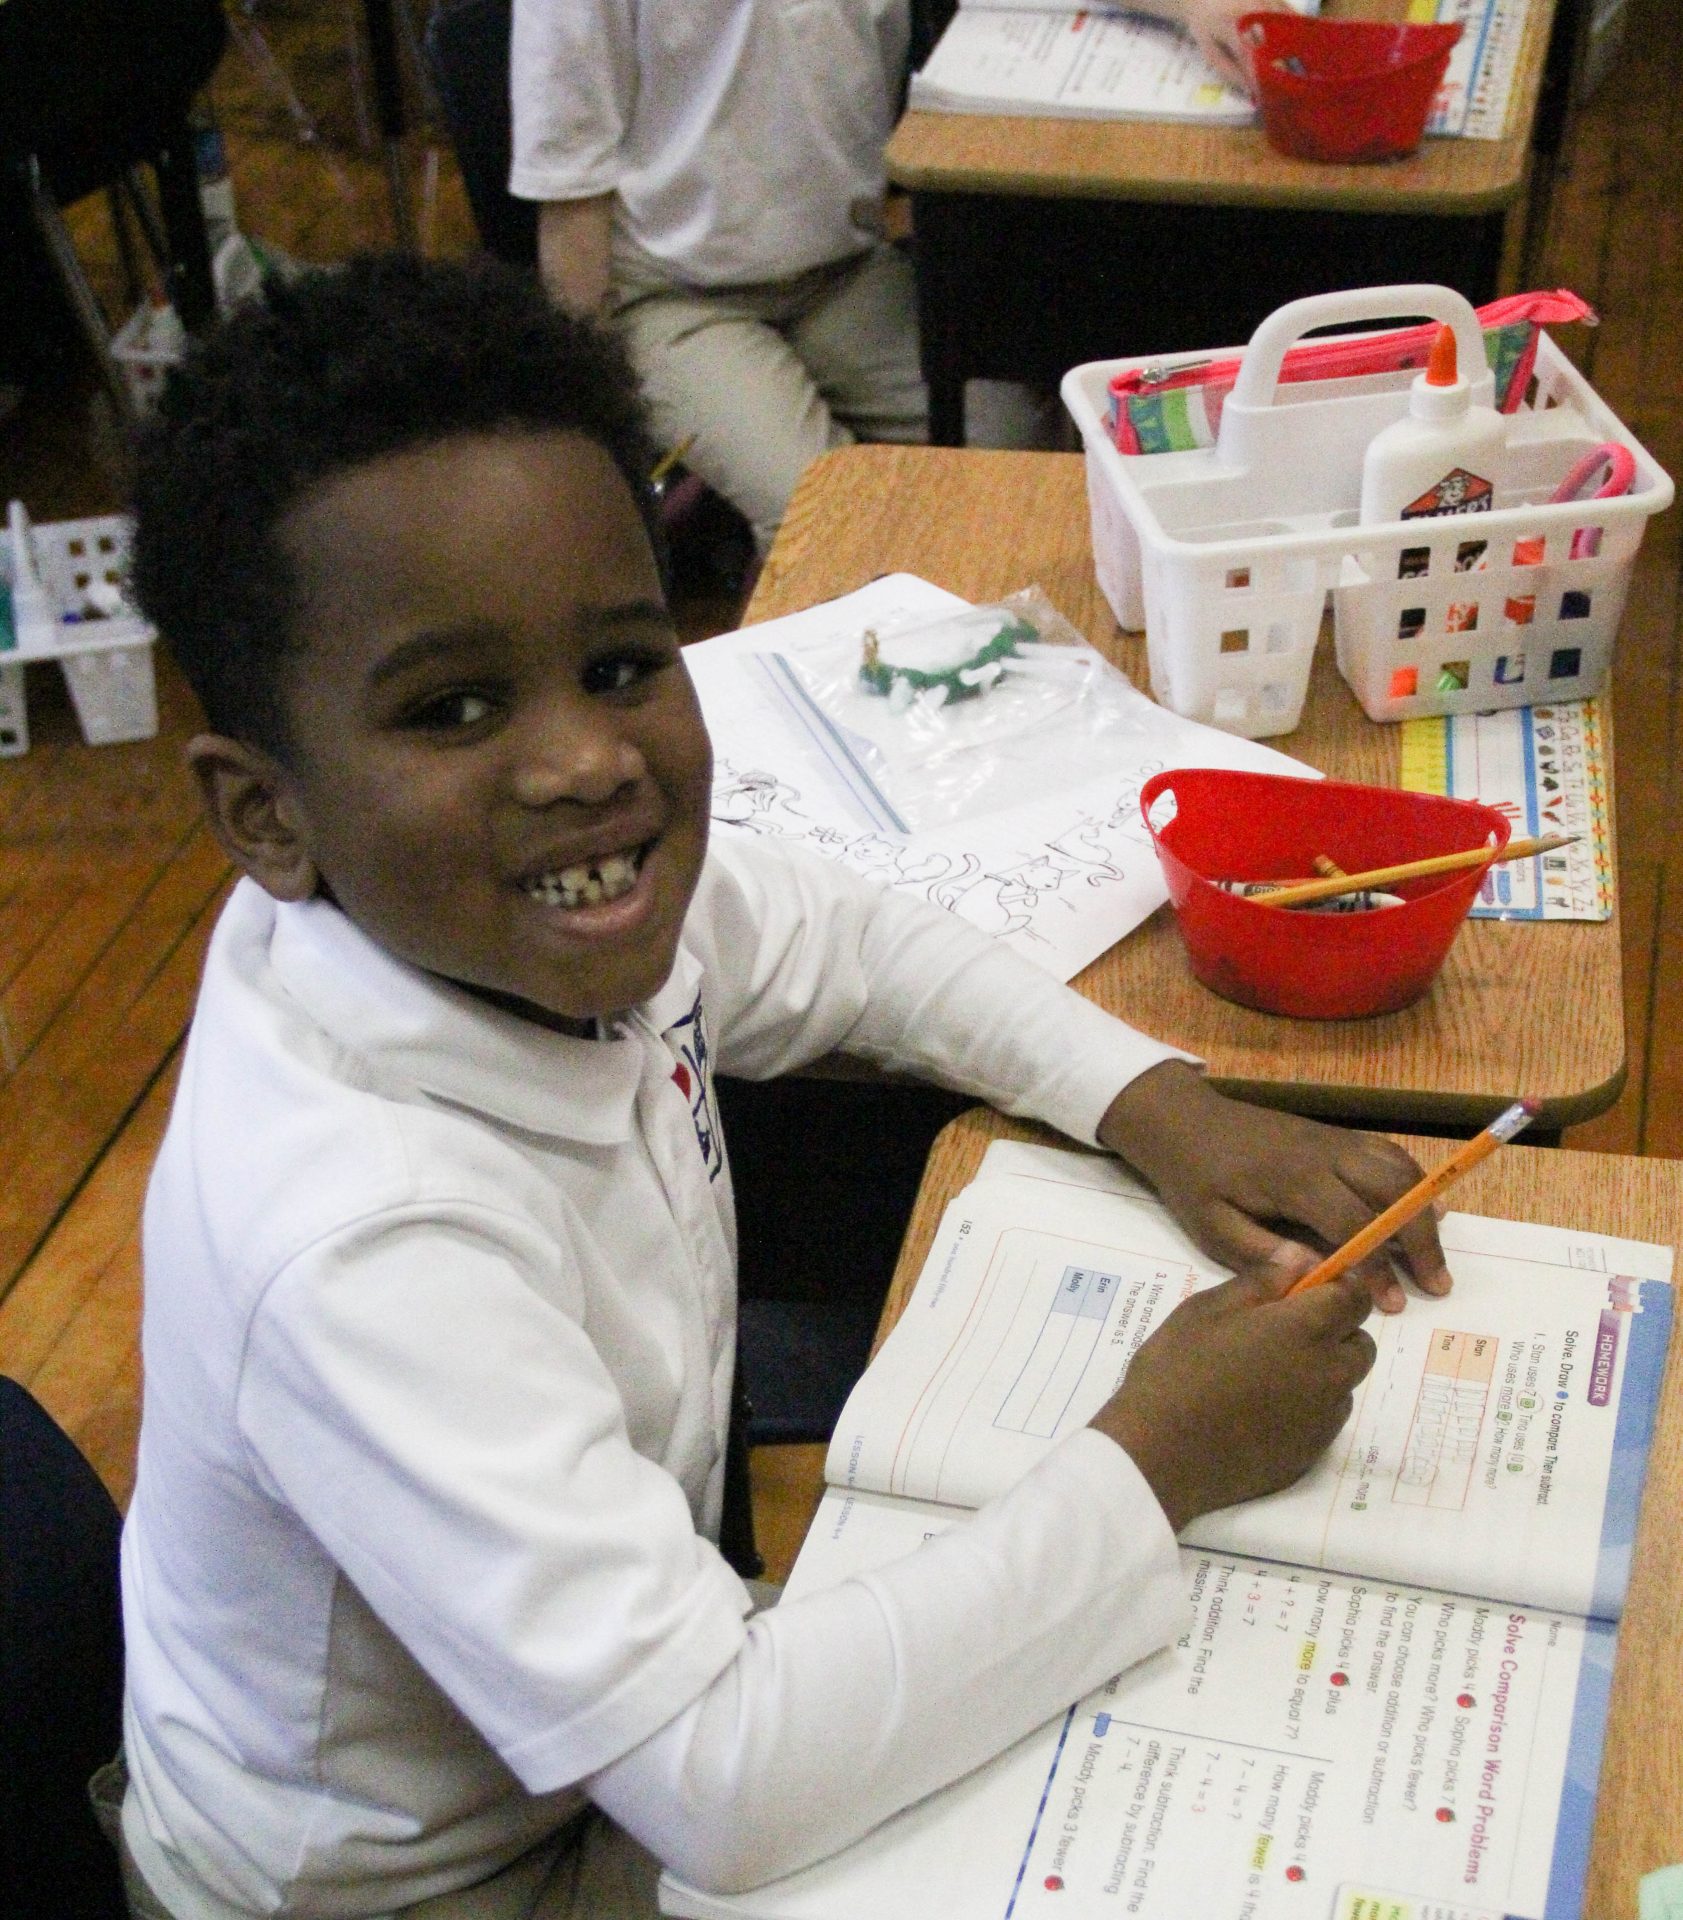 A young Black male student